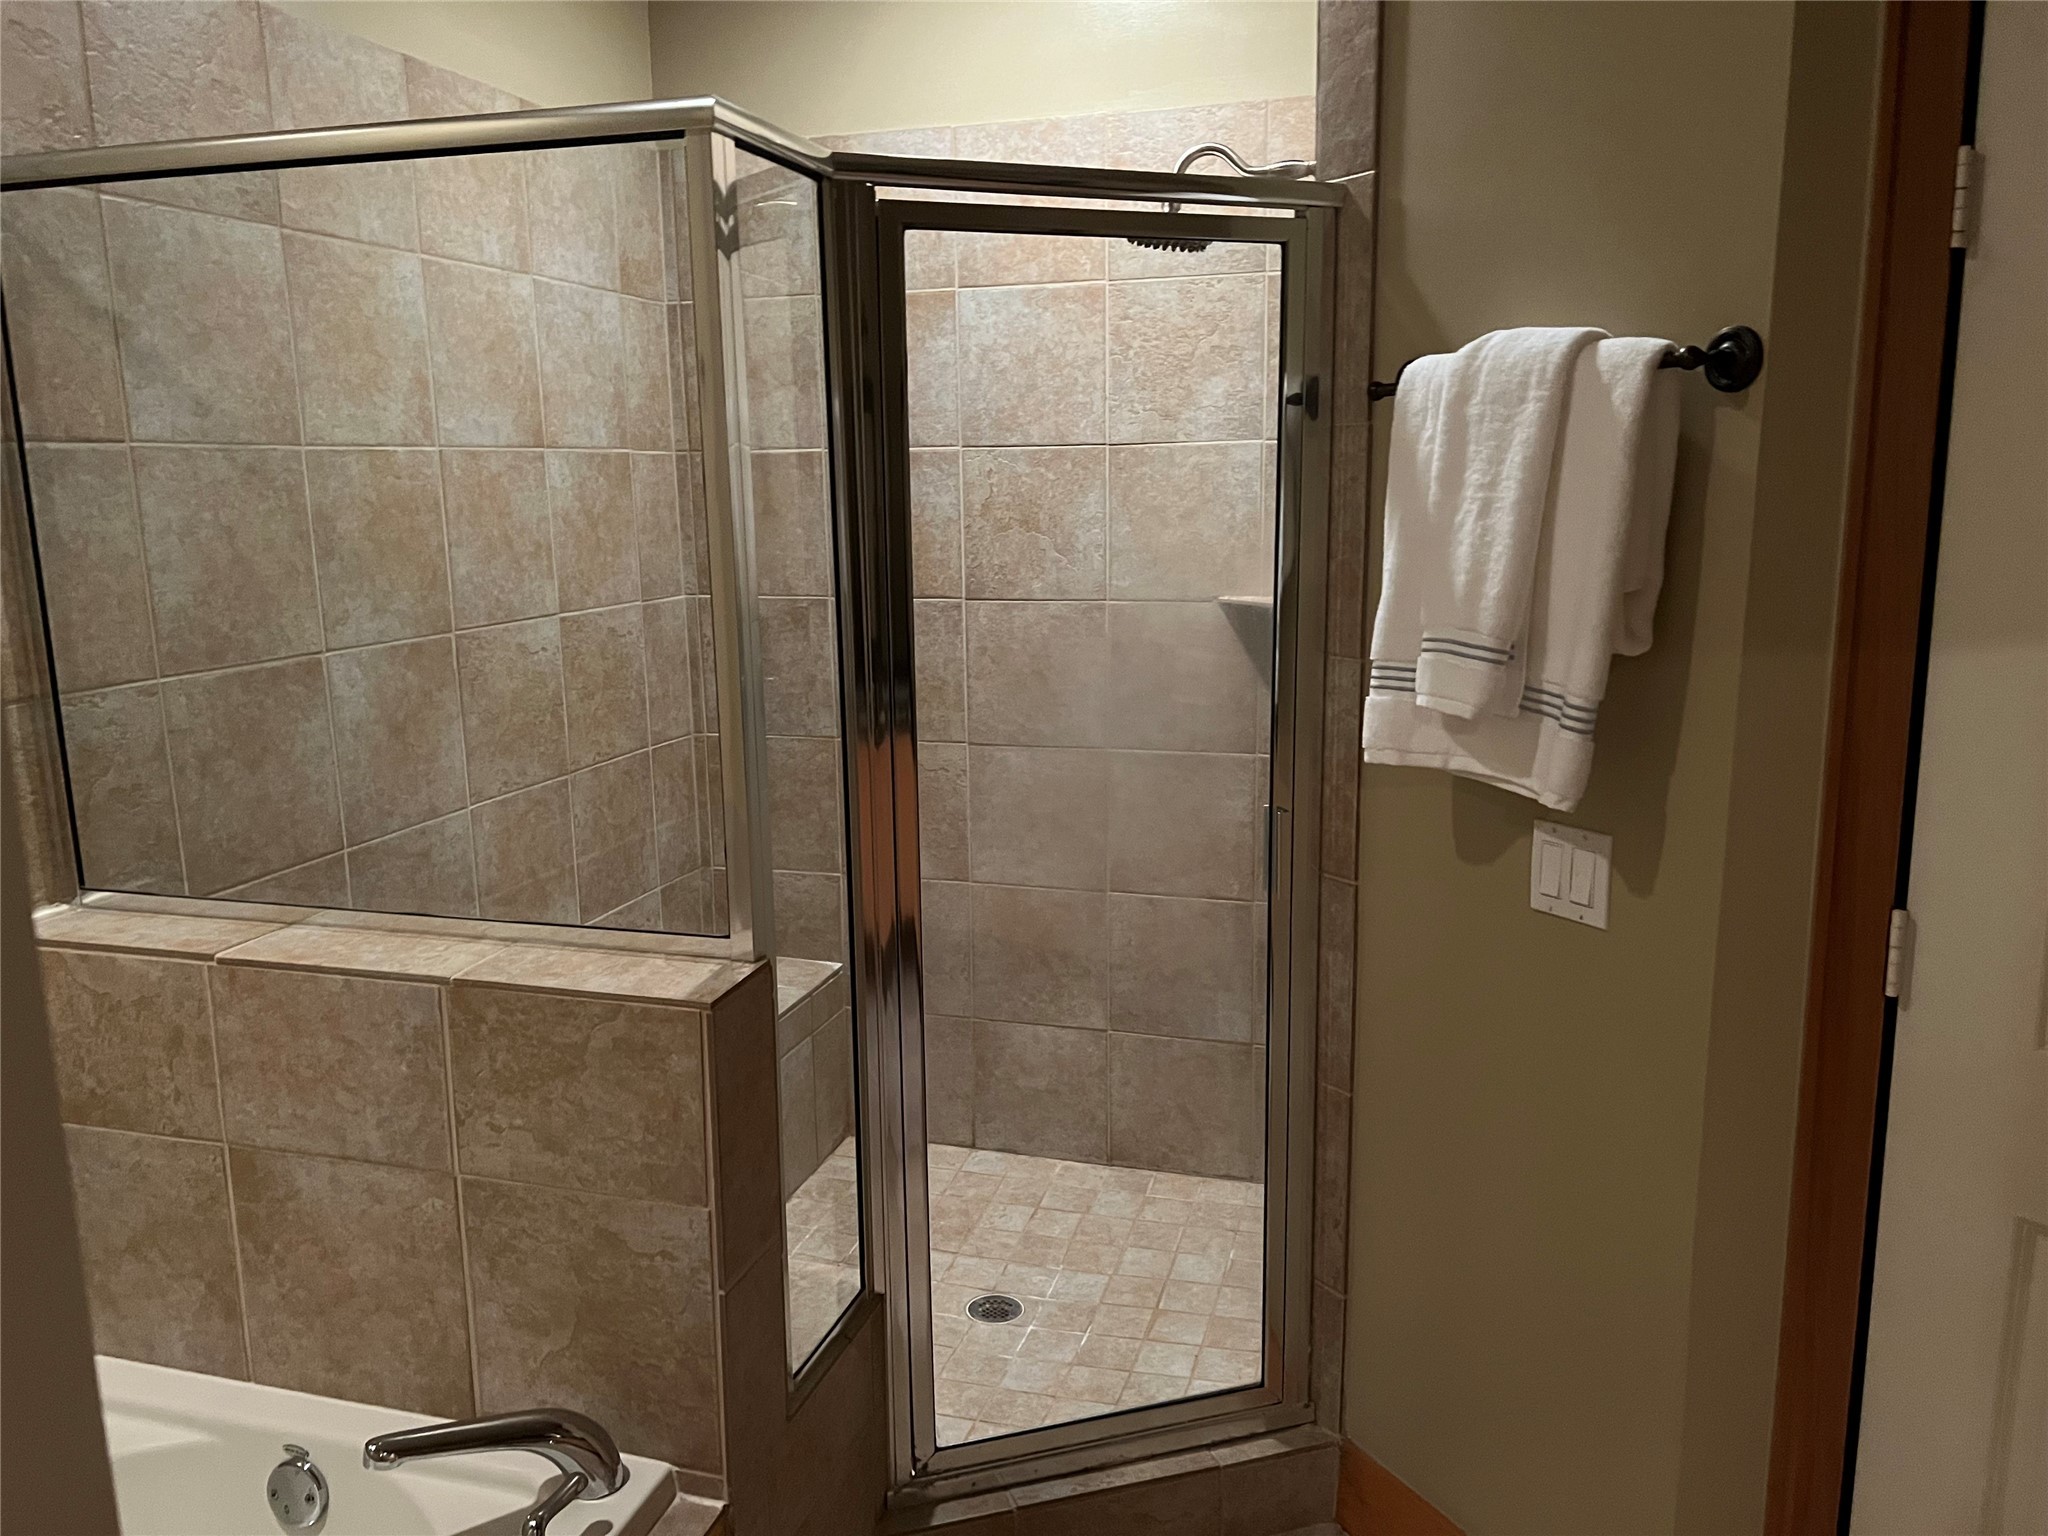 rimary bathroom features a large walk-in shower with tile surround and sitting area.